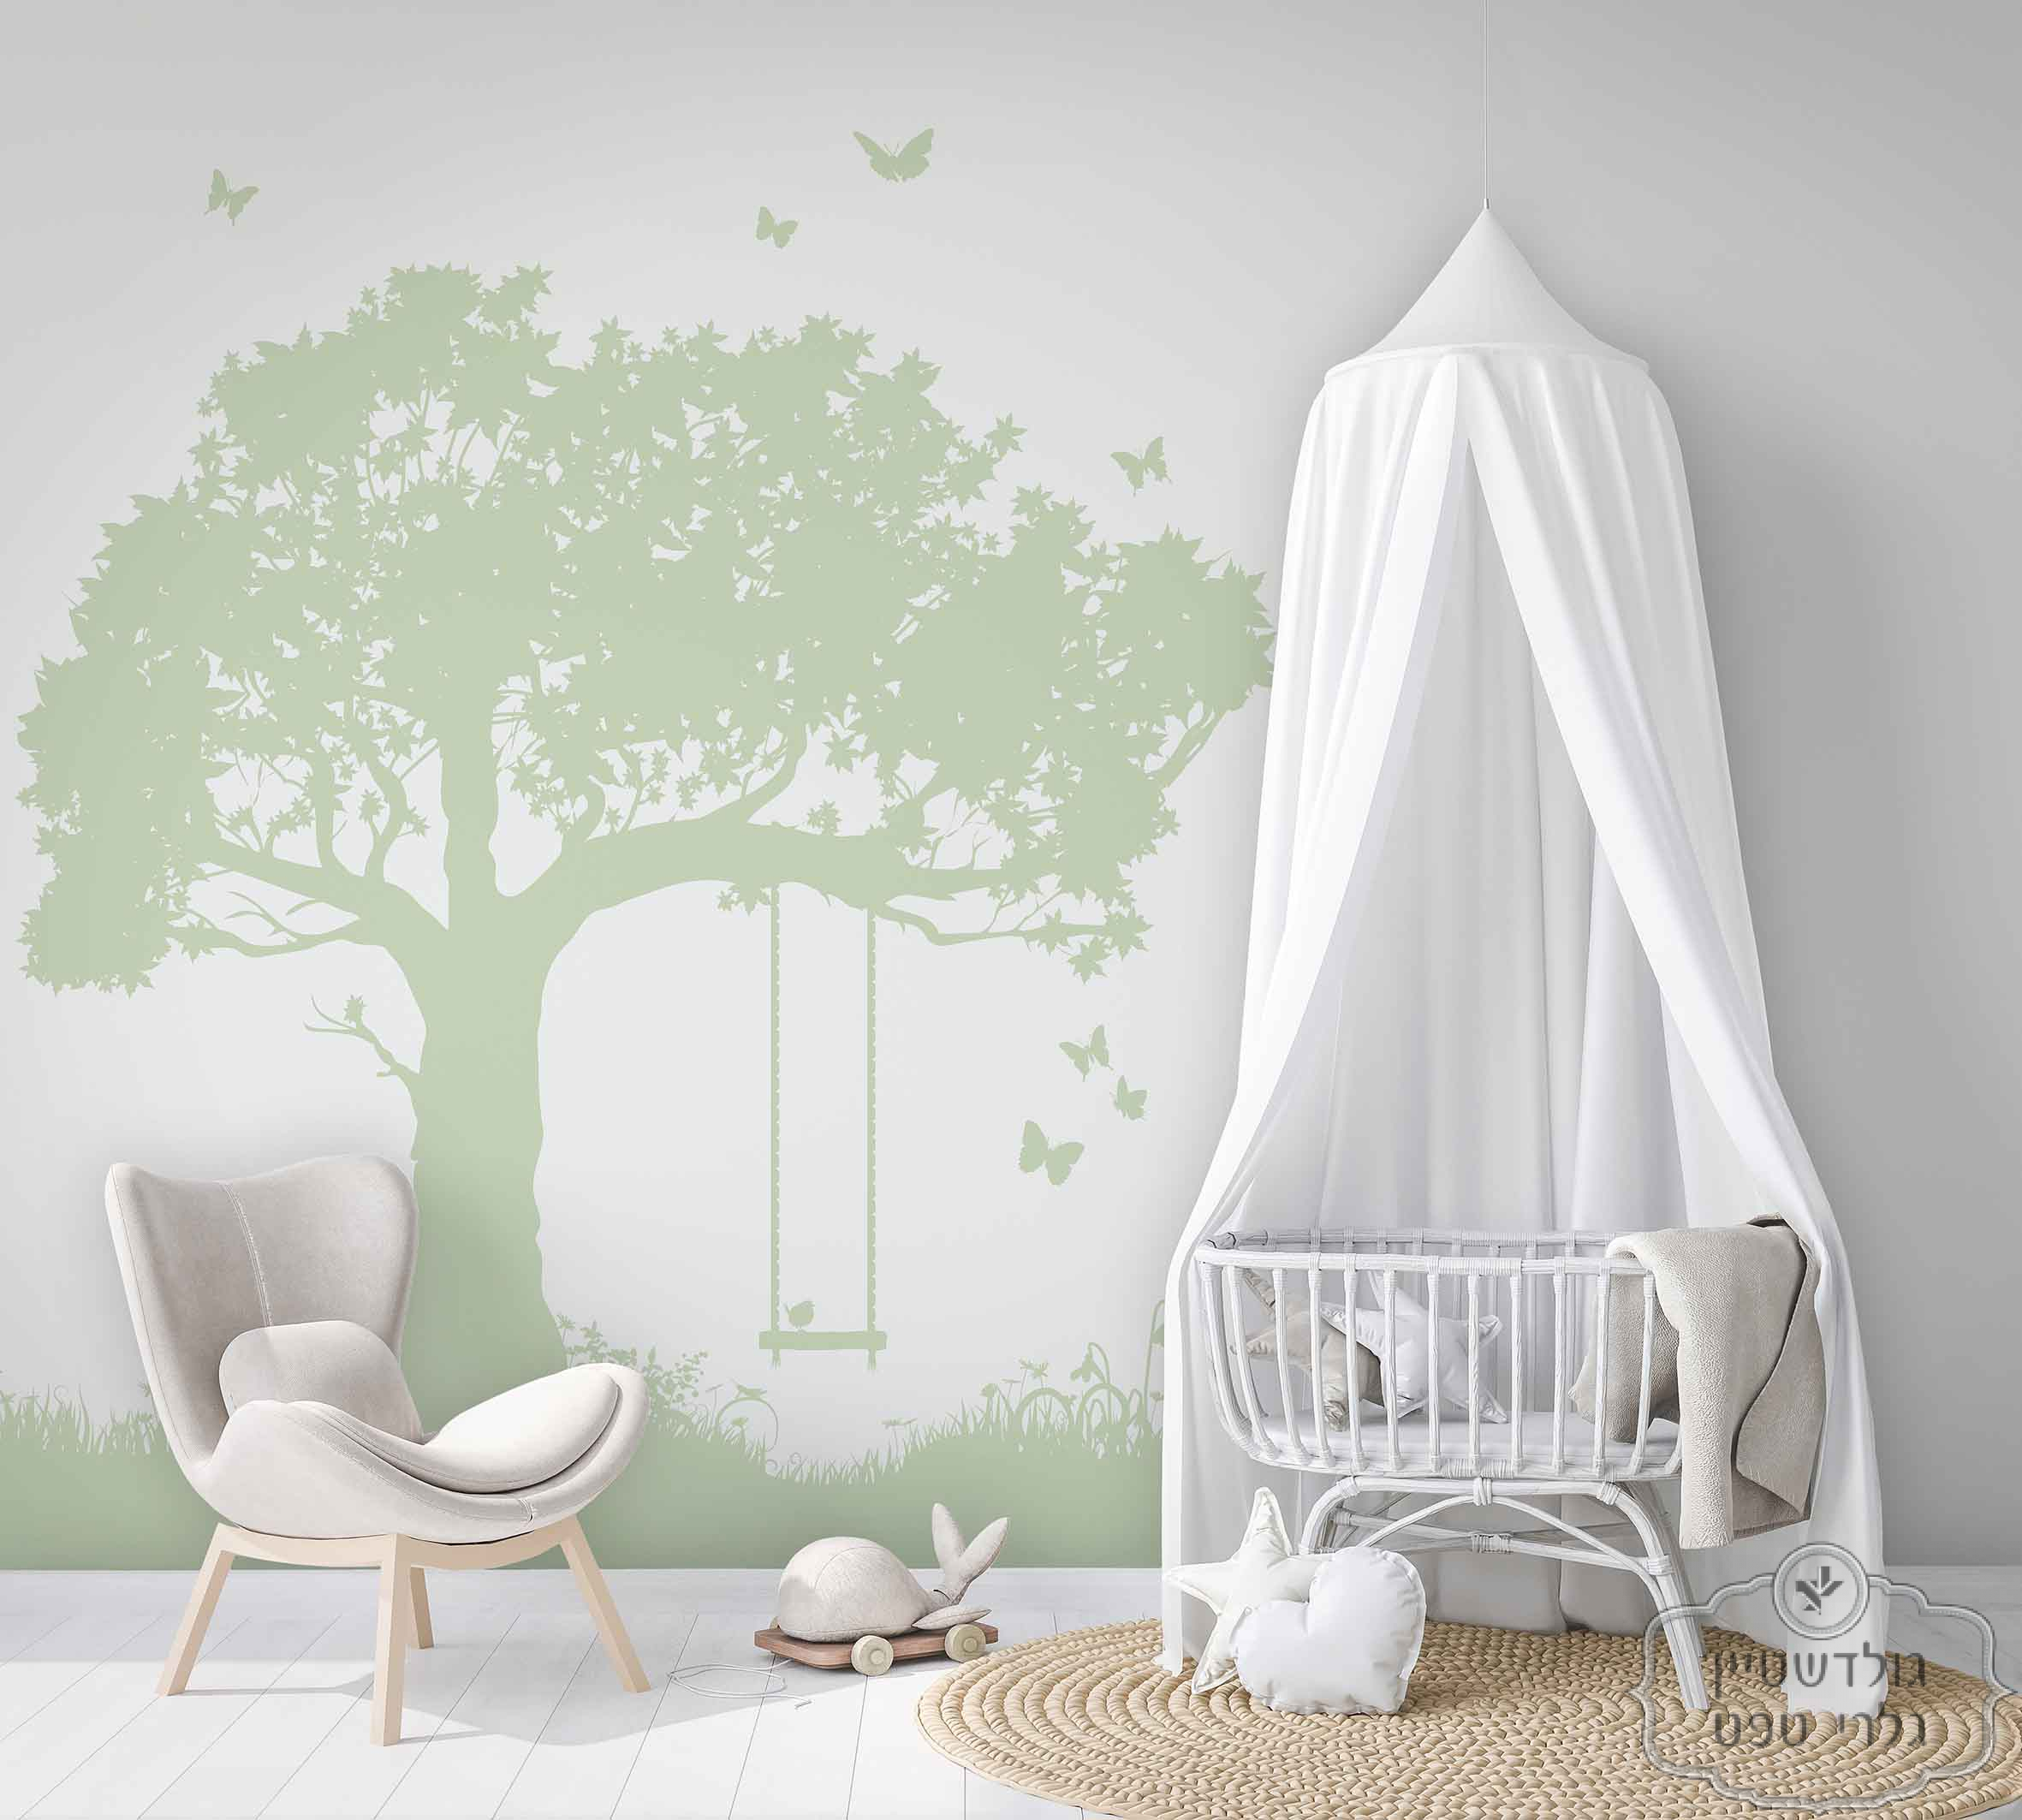 Mock,Up,Wall,In,Farmhouse,Interior,Background,In,Baby,Room,